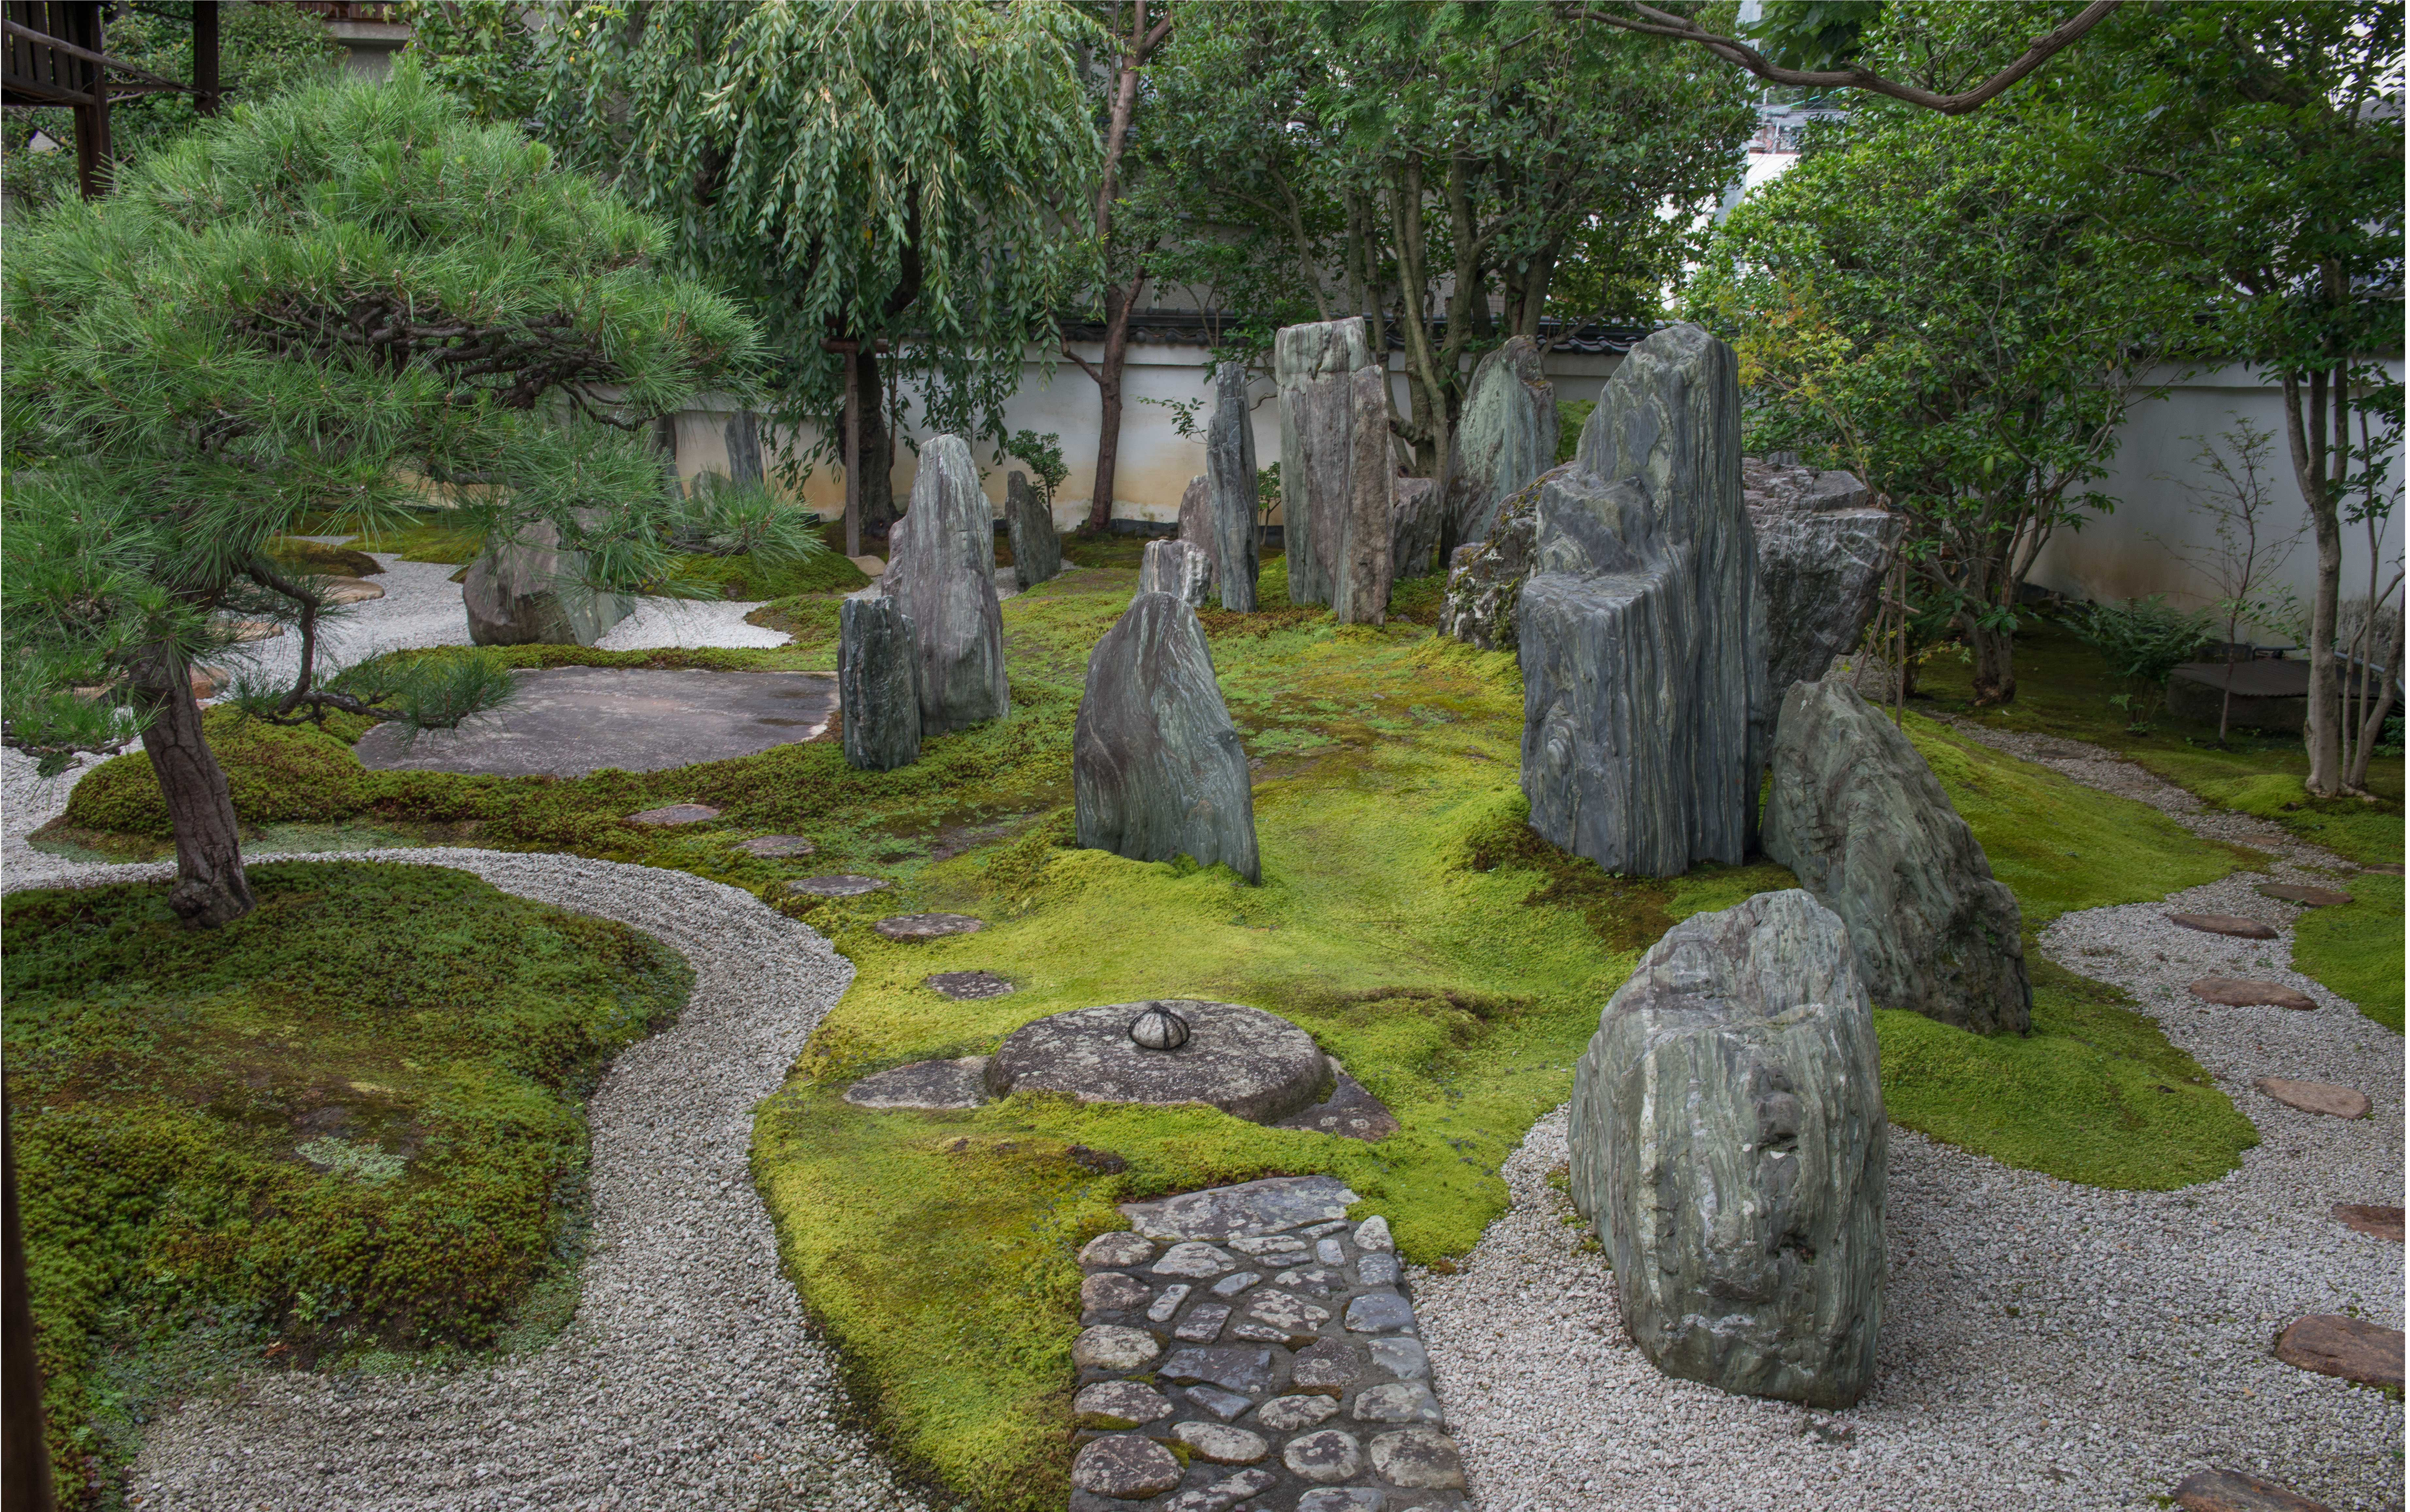 Signature arrangements: An overview of the central garden at Mirei Shigemori’s old home in Kyoto | STEPHEN MANSFIELD